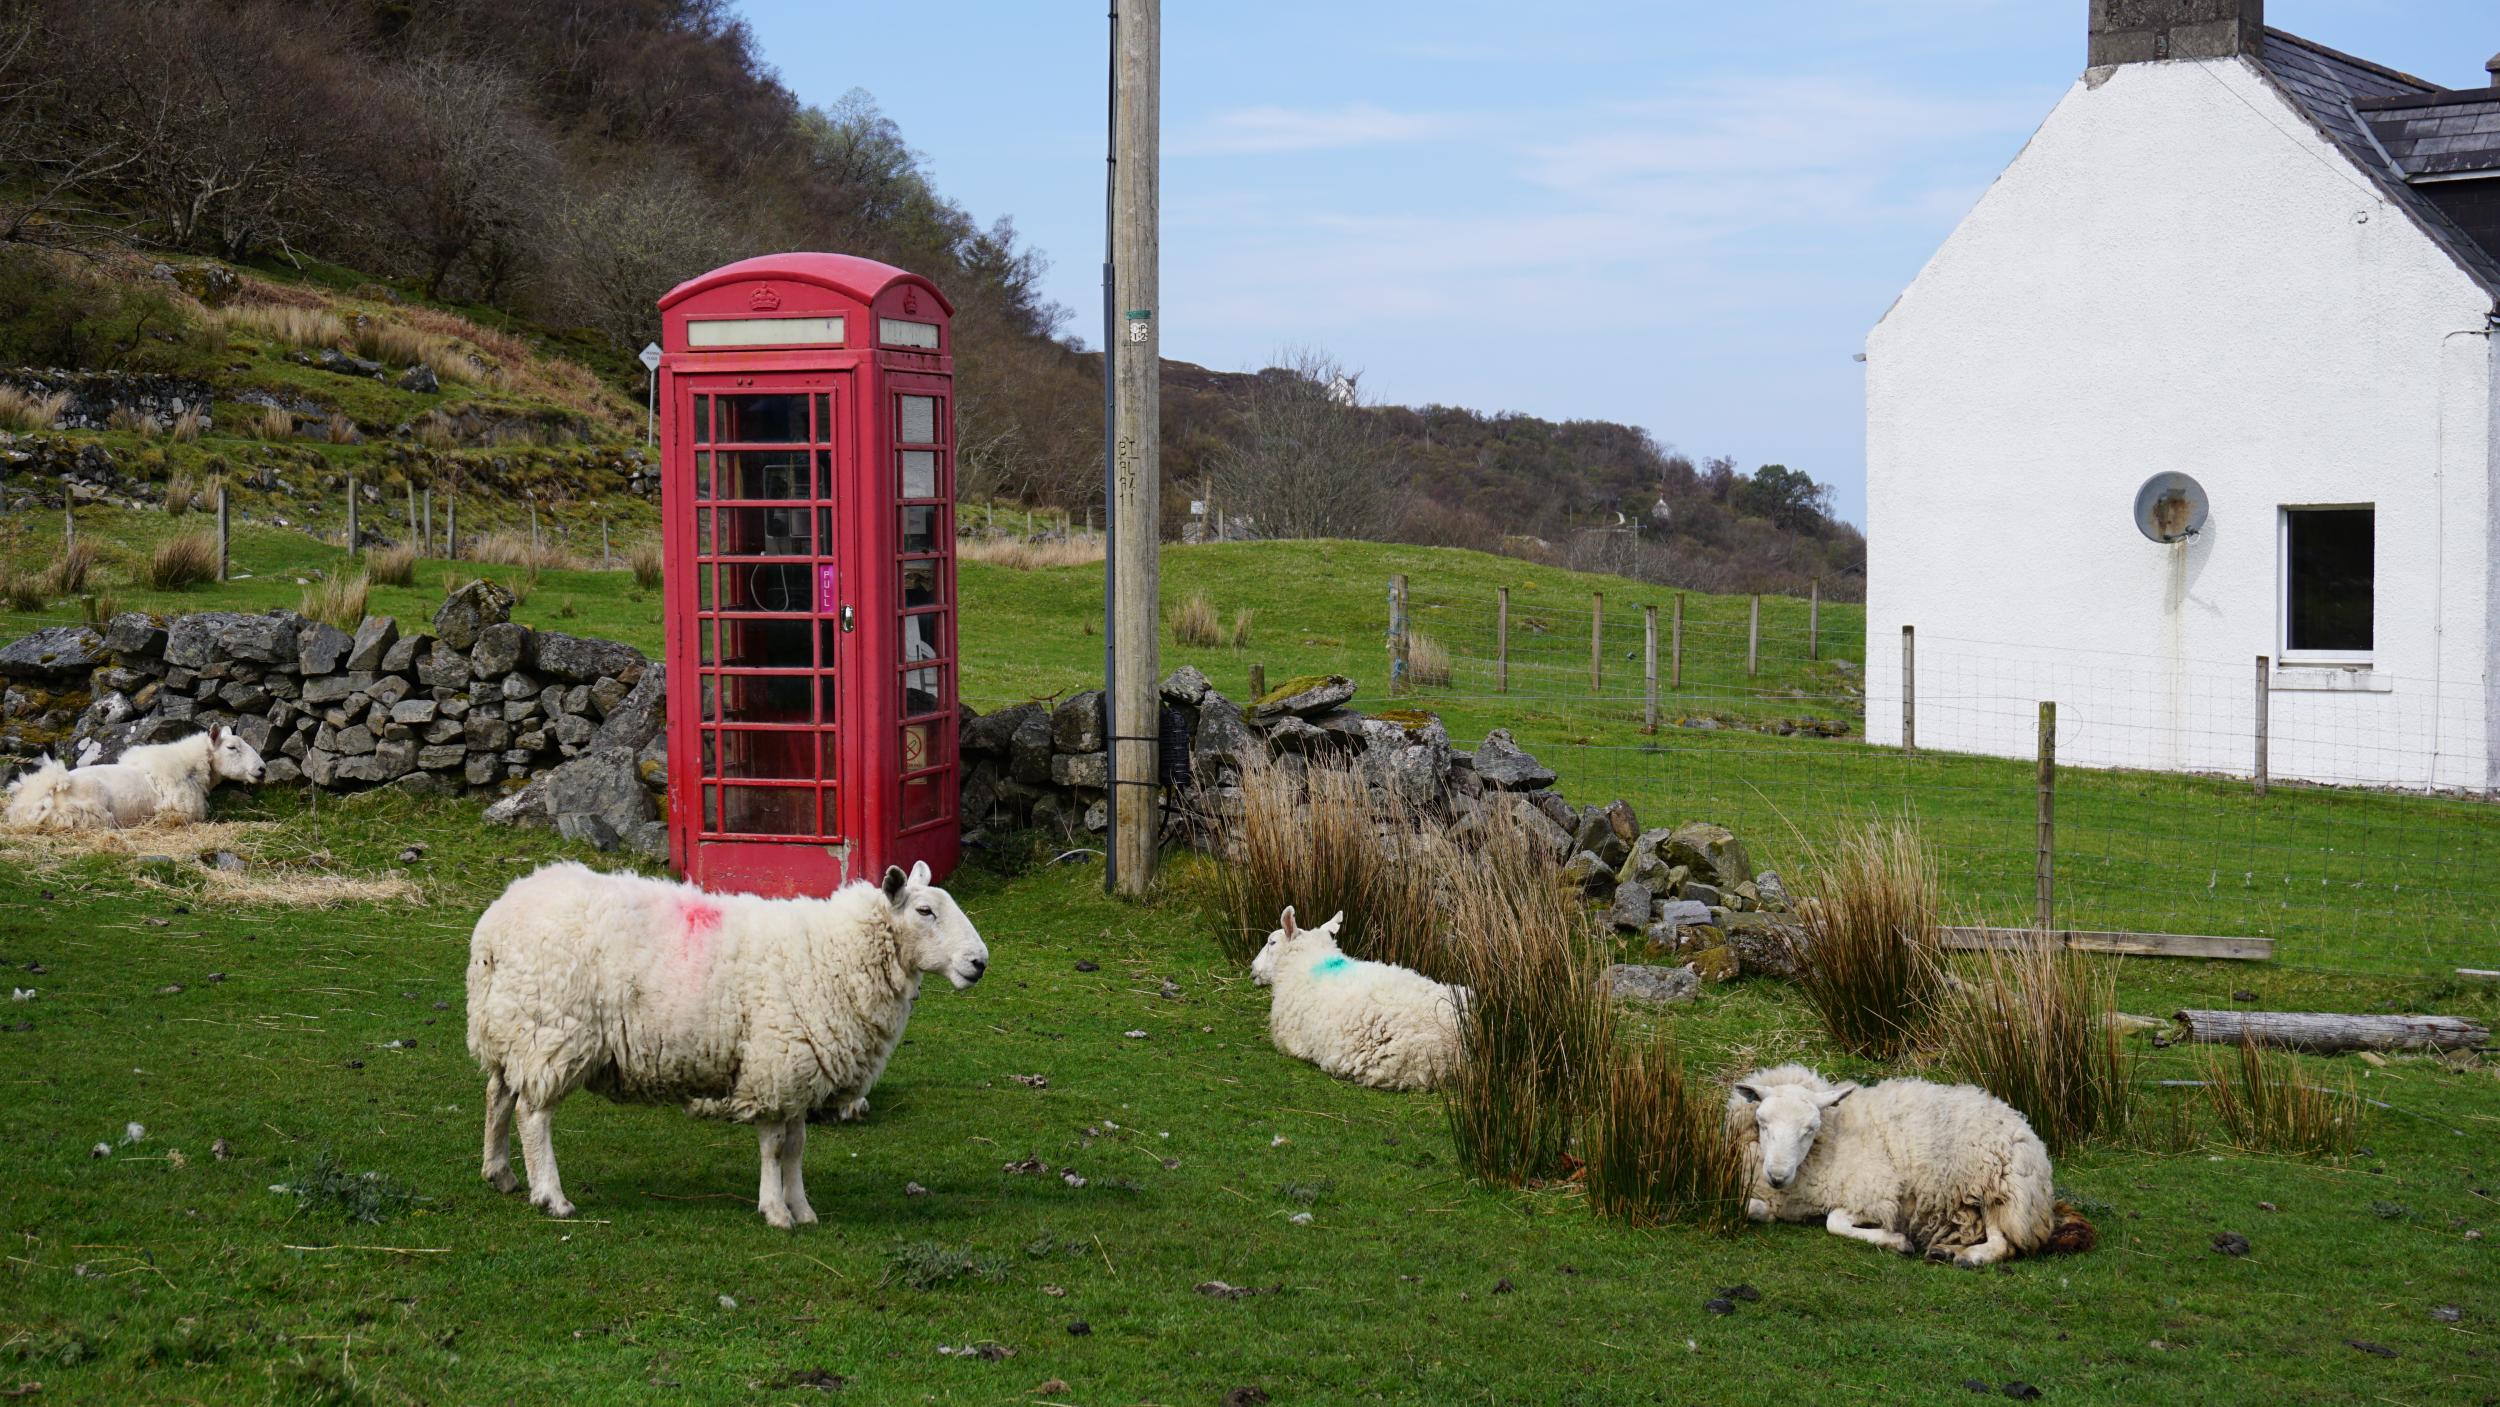 The key to rural life is a balance between isolation and communication